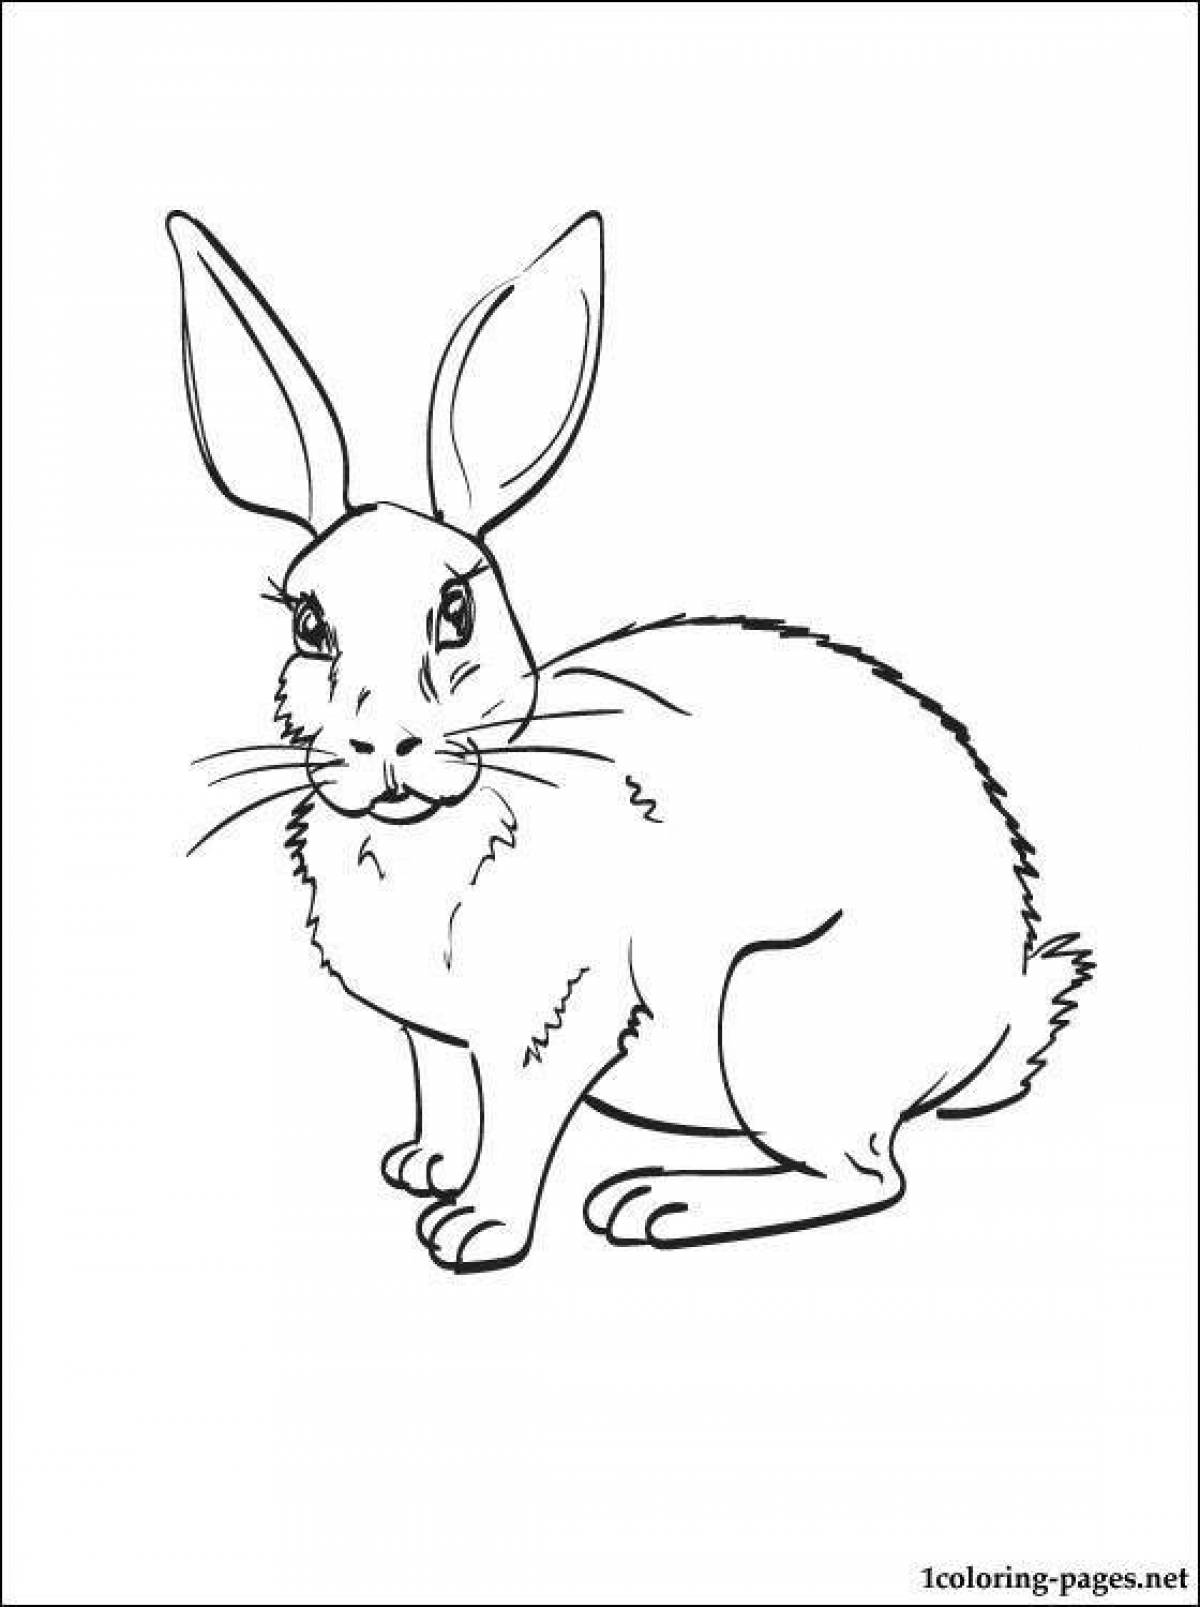 Playful koyan coloring page for kids